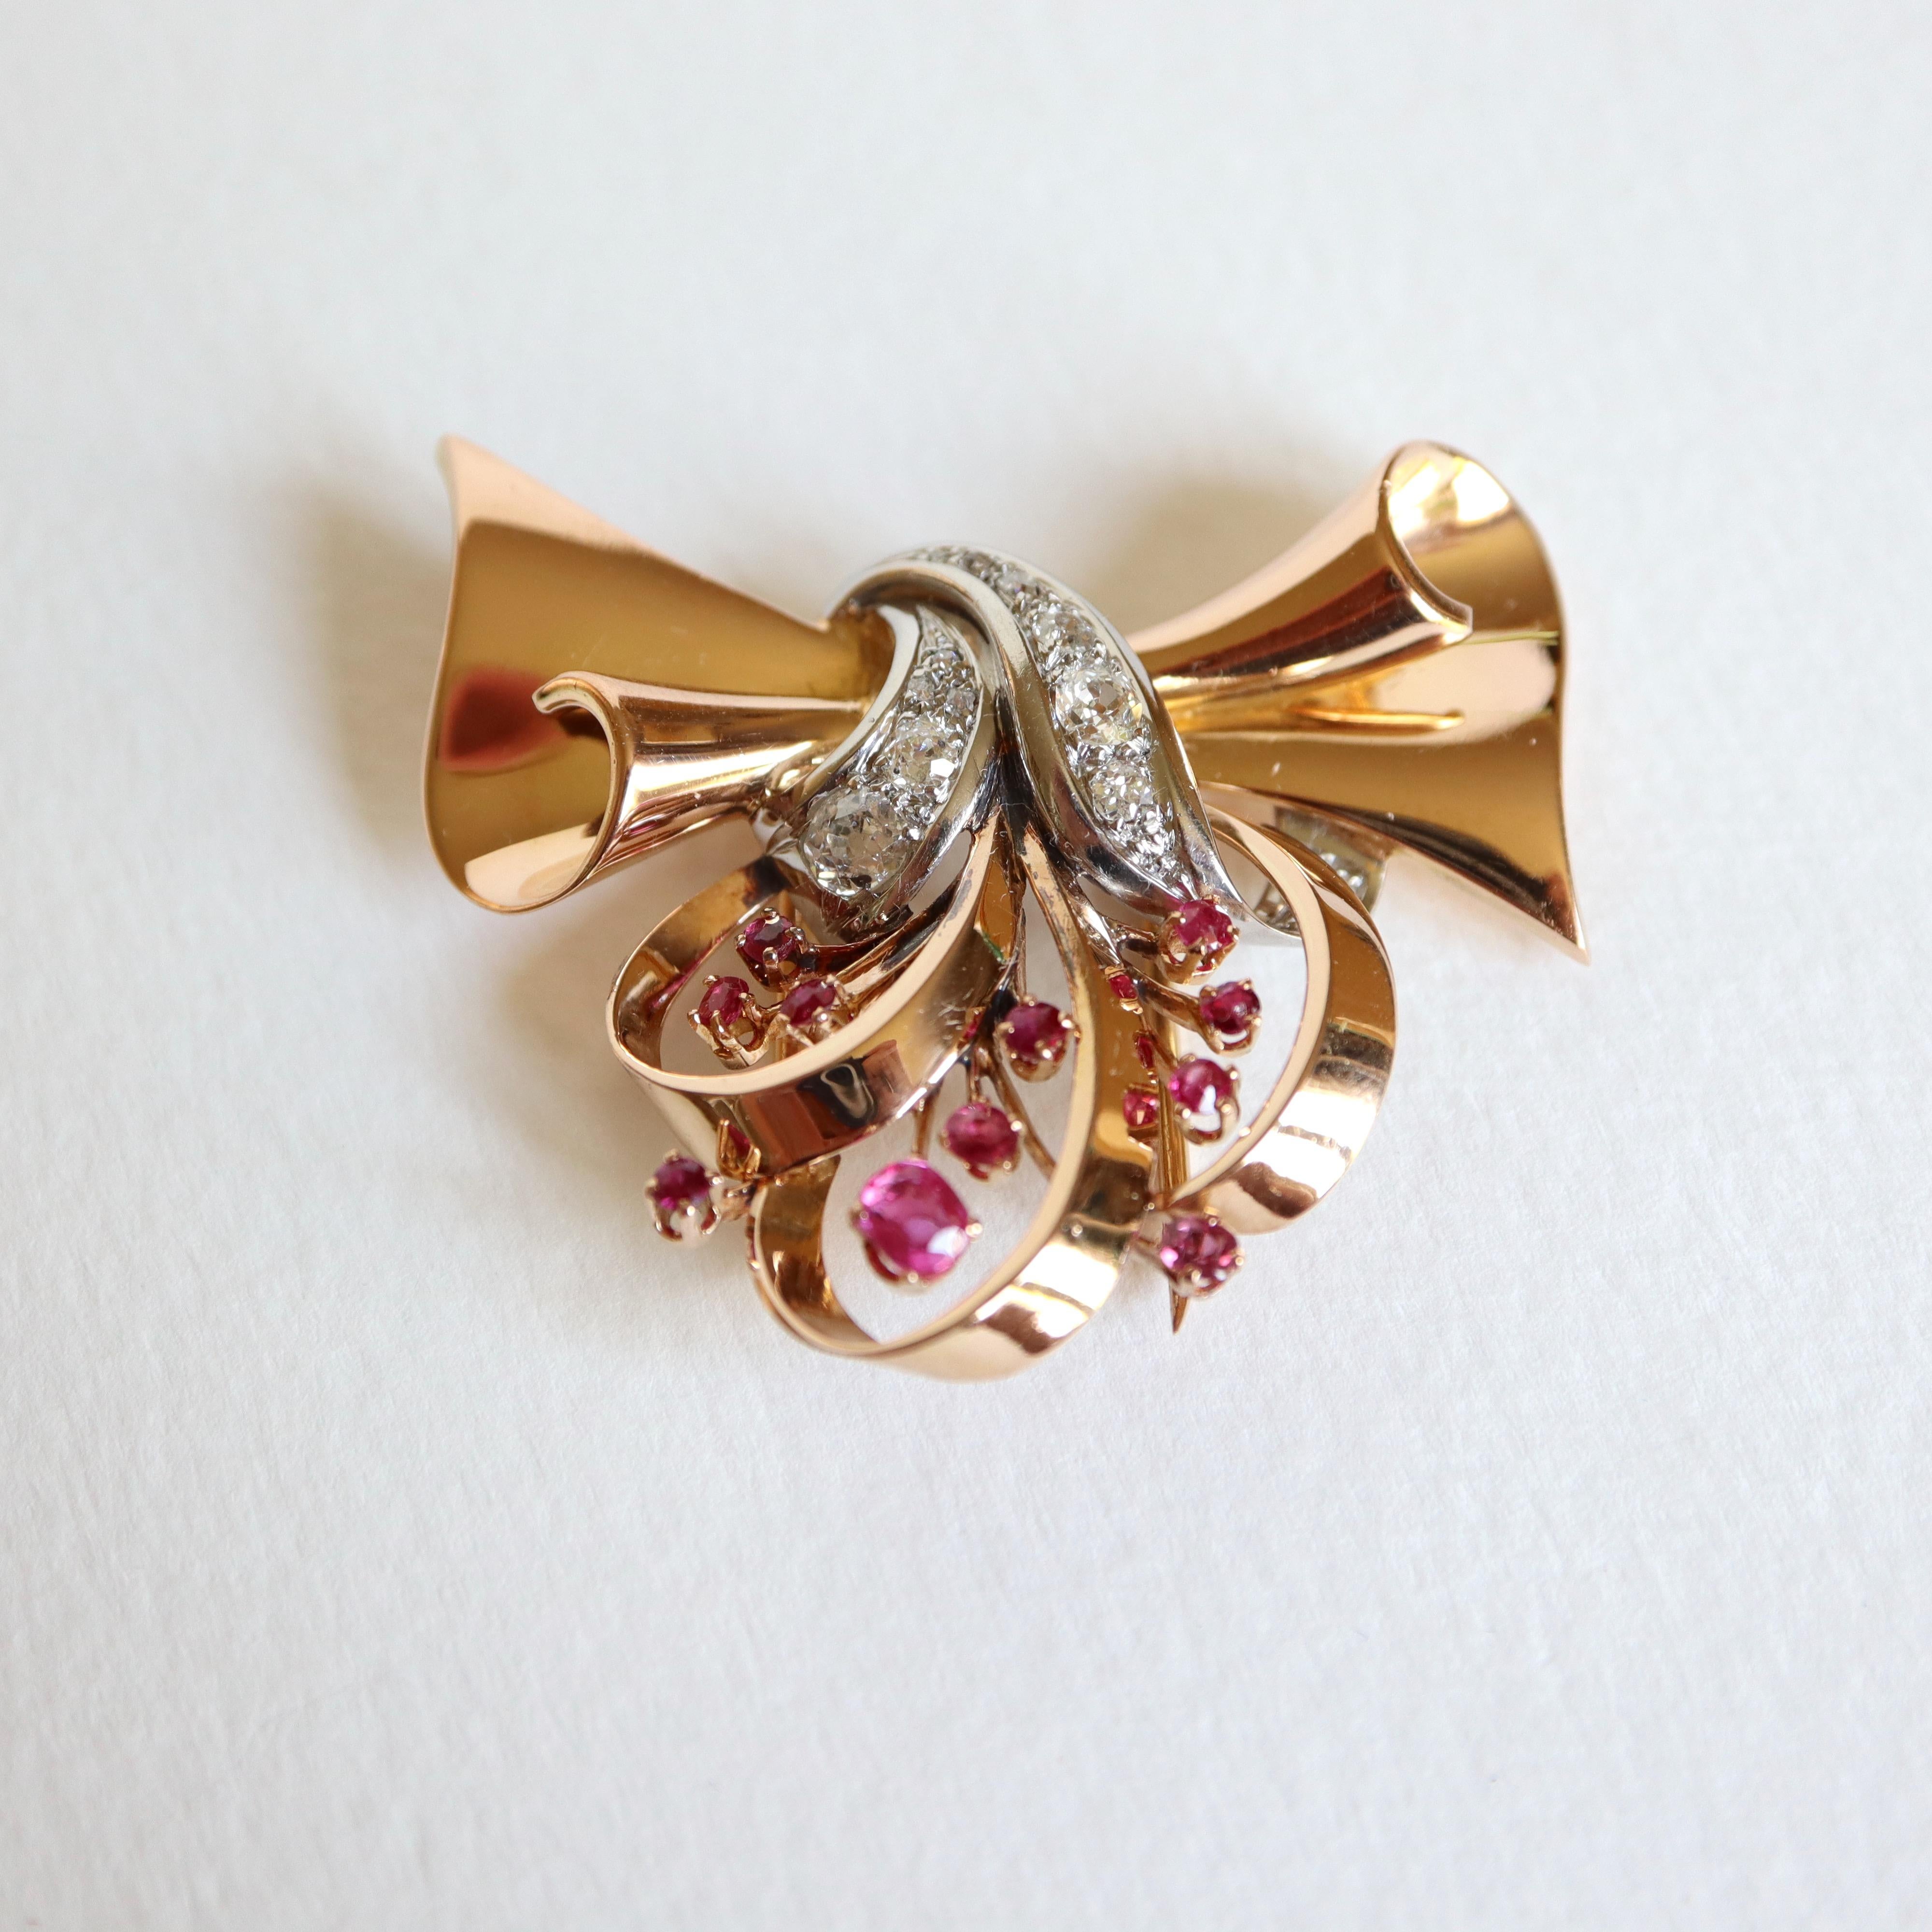 Brilliant Cut Brooch 1940s in 18 Karat Yellow Gold, Diamonds and Rubies Platinum For Sale